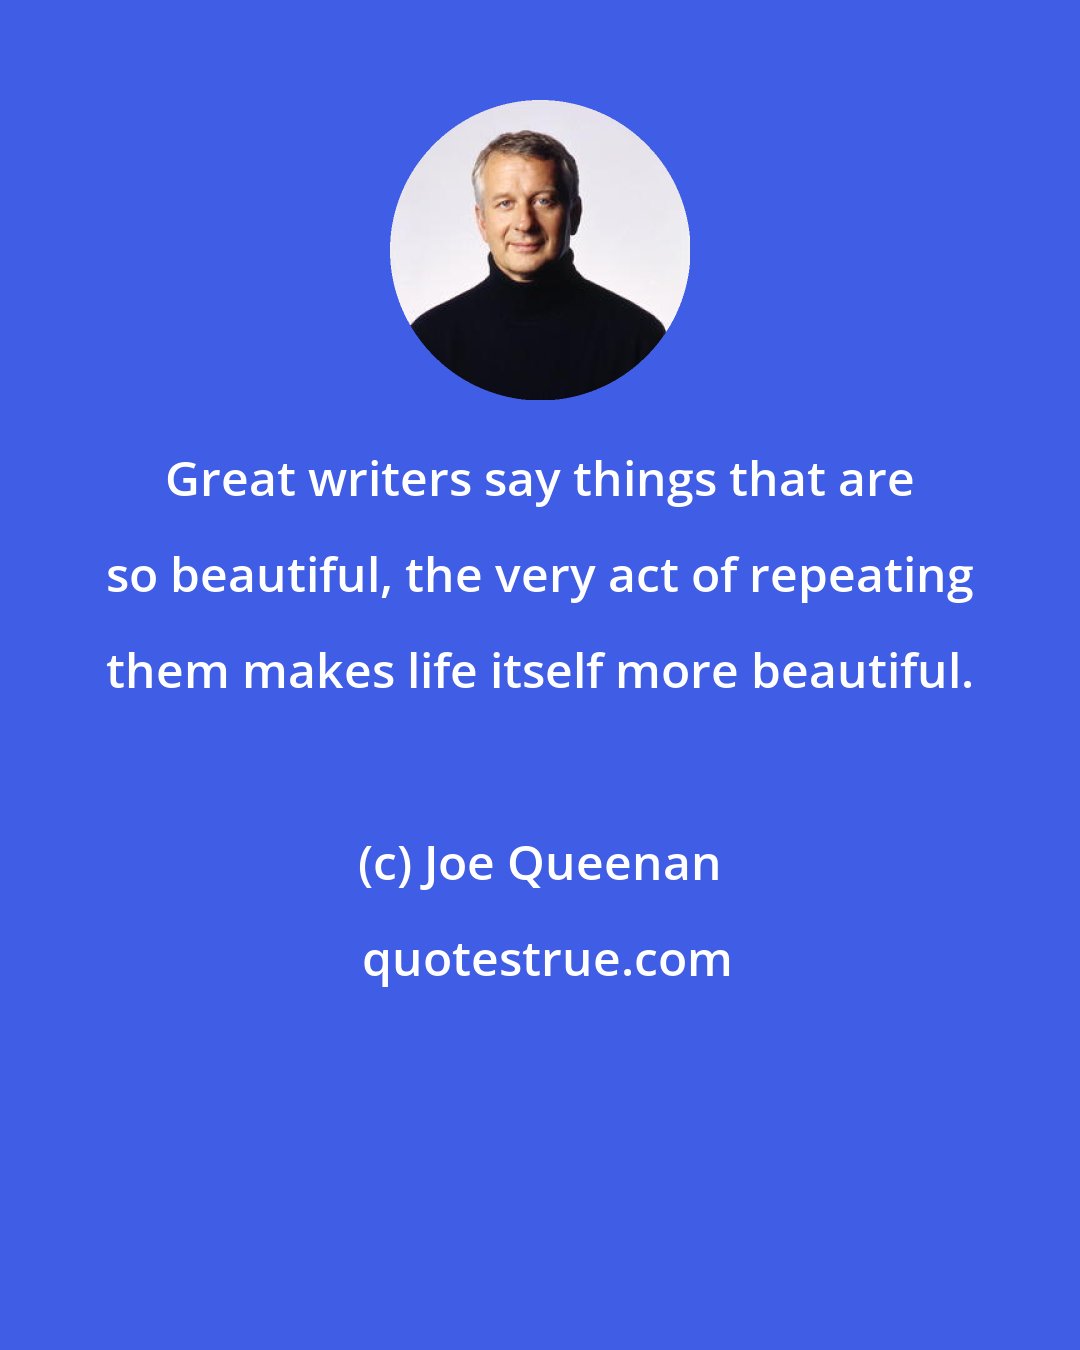 Joe Queenan: Great writers say things that are so beautiful, the very act of repeating them makes life itself more beautiful.